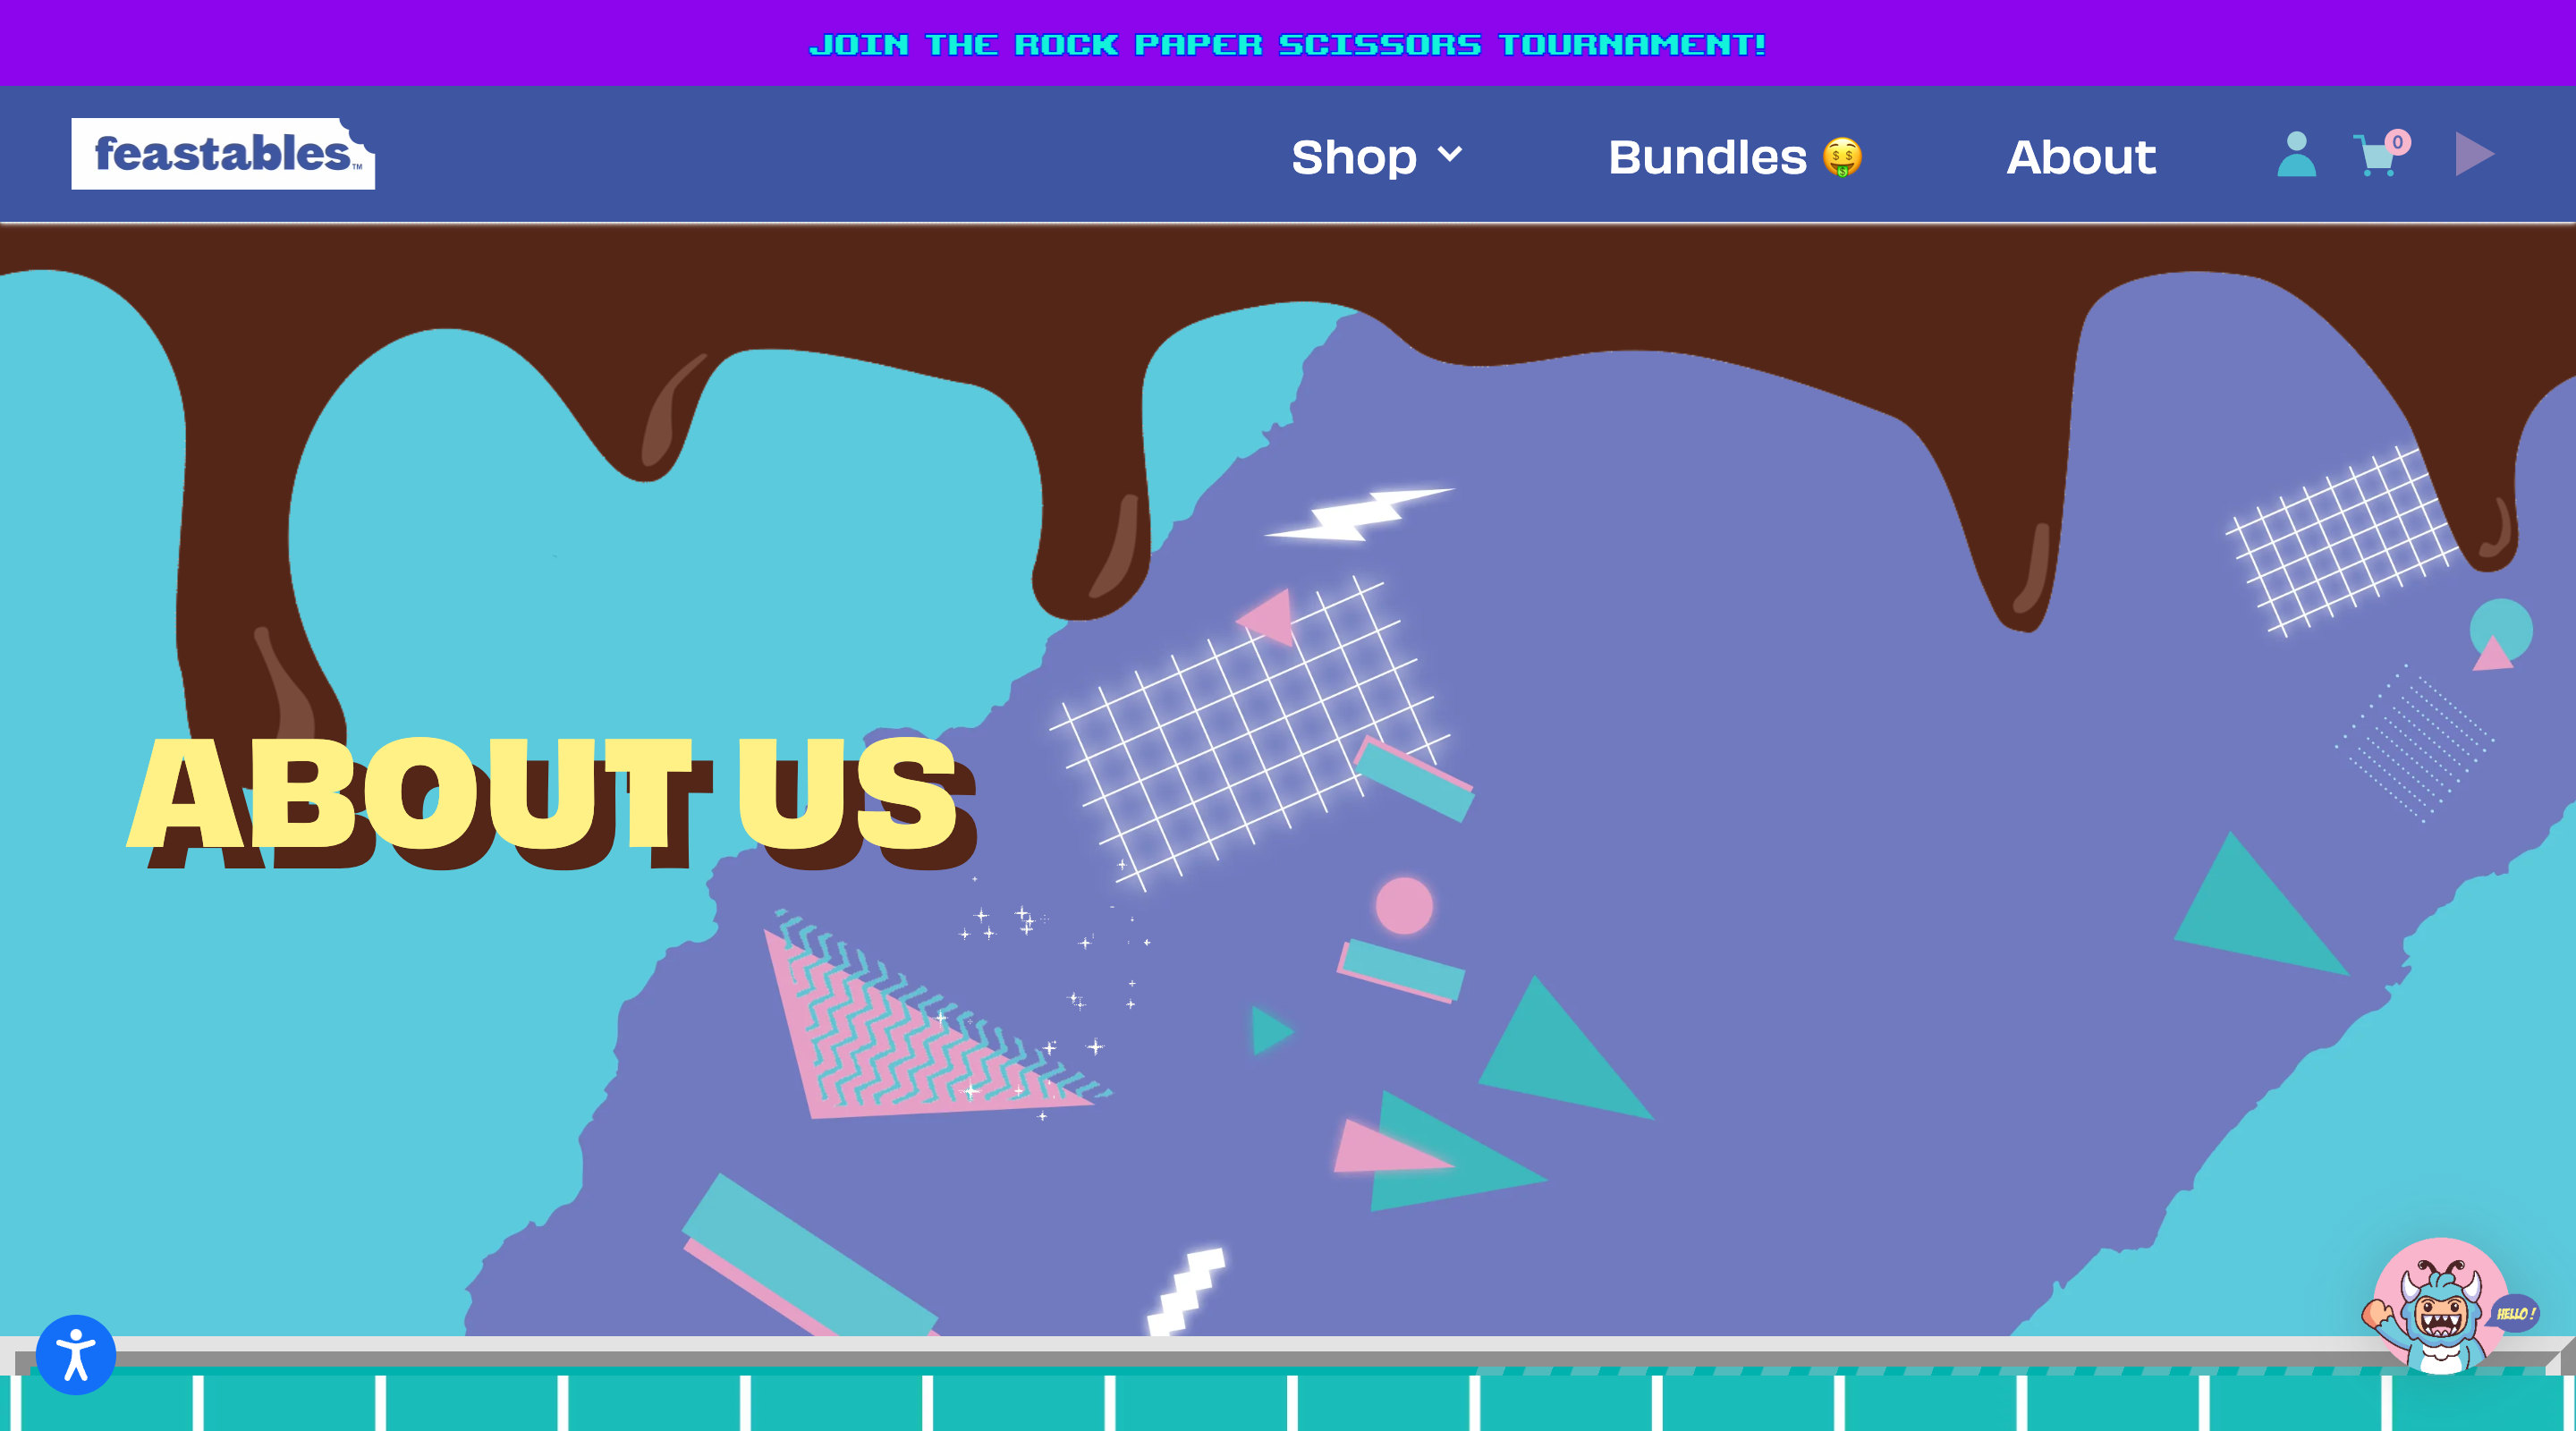 Screenshot of the 'About Us' page of the Feastables website. A header contains the Feastables logo and main site navigation. The hero section contains the 'About Us' title with an illustrative background that includes chocolate dripping down from the top.